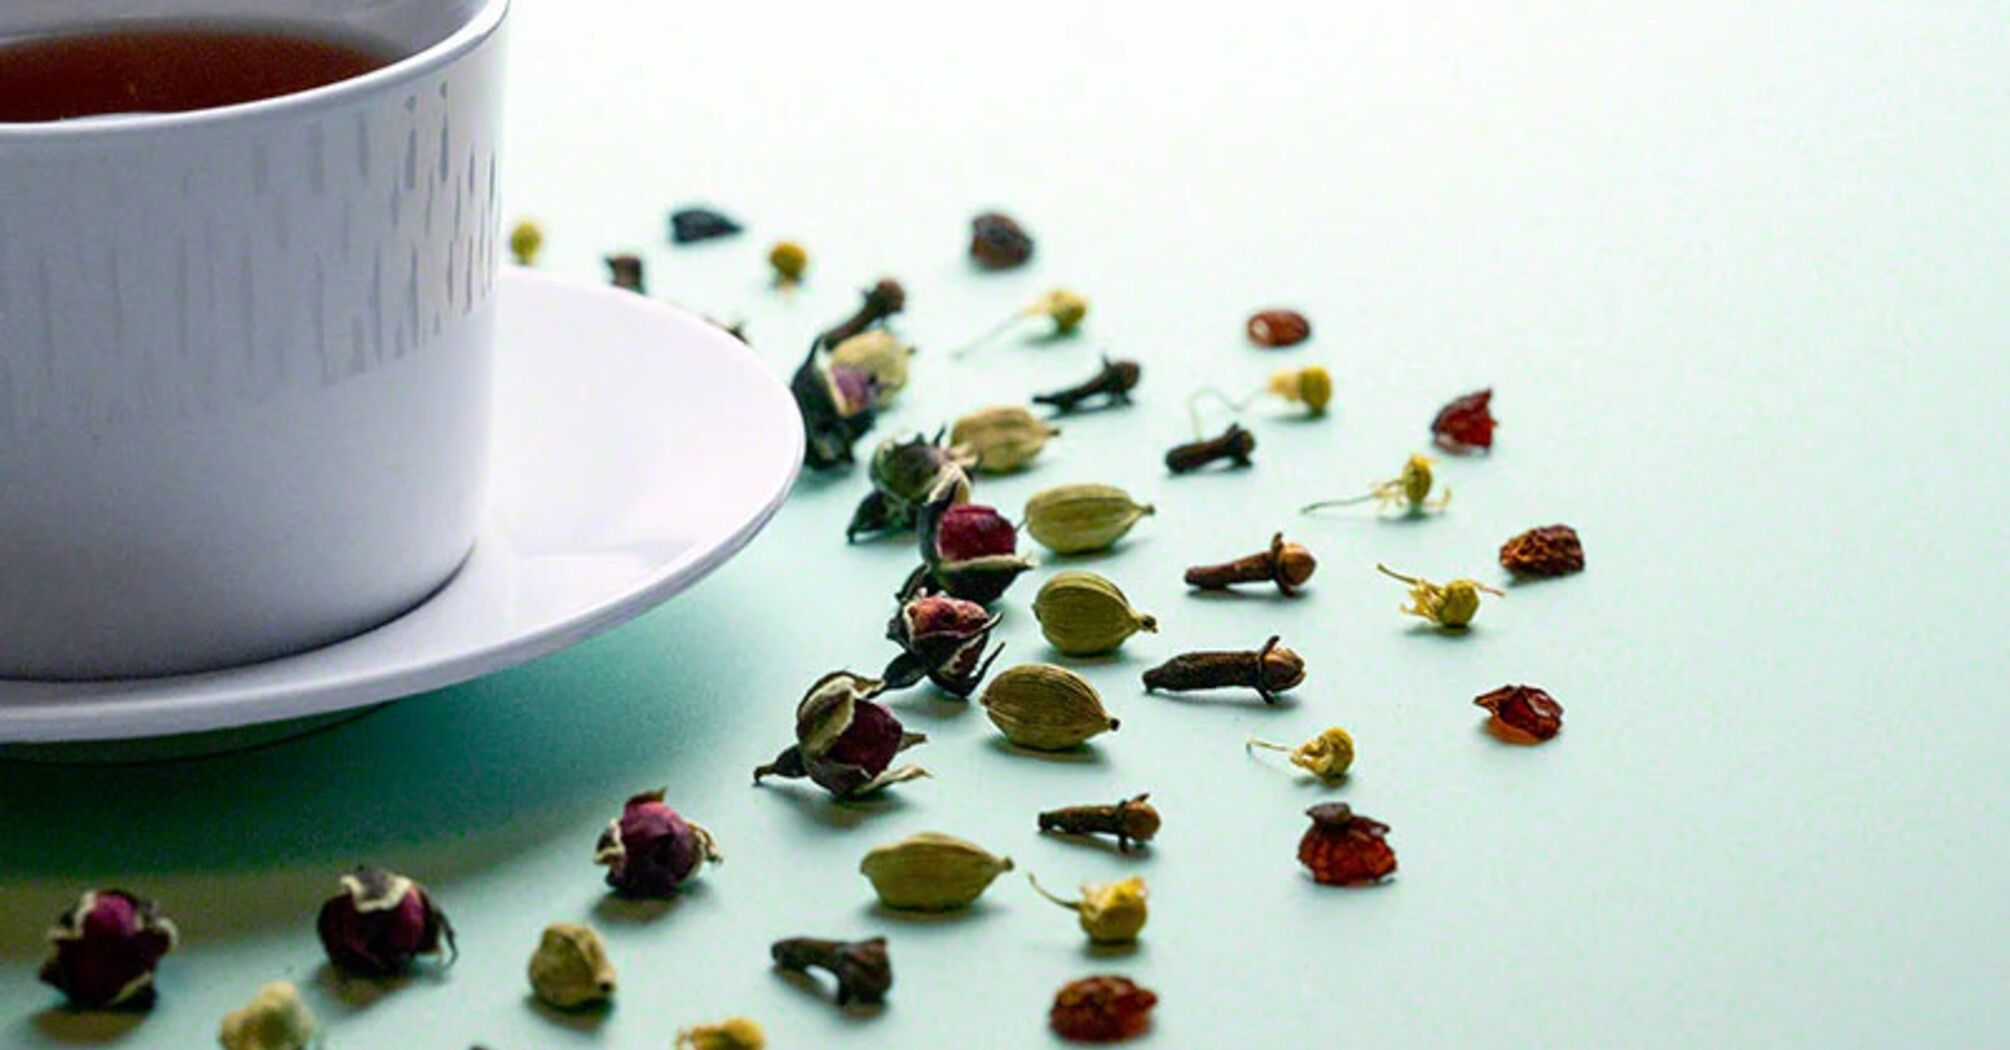 What to add to your evening tea for flavor